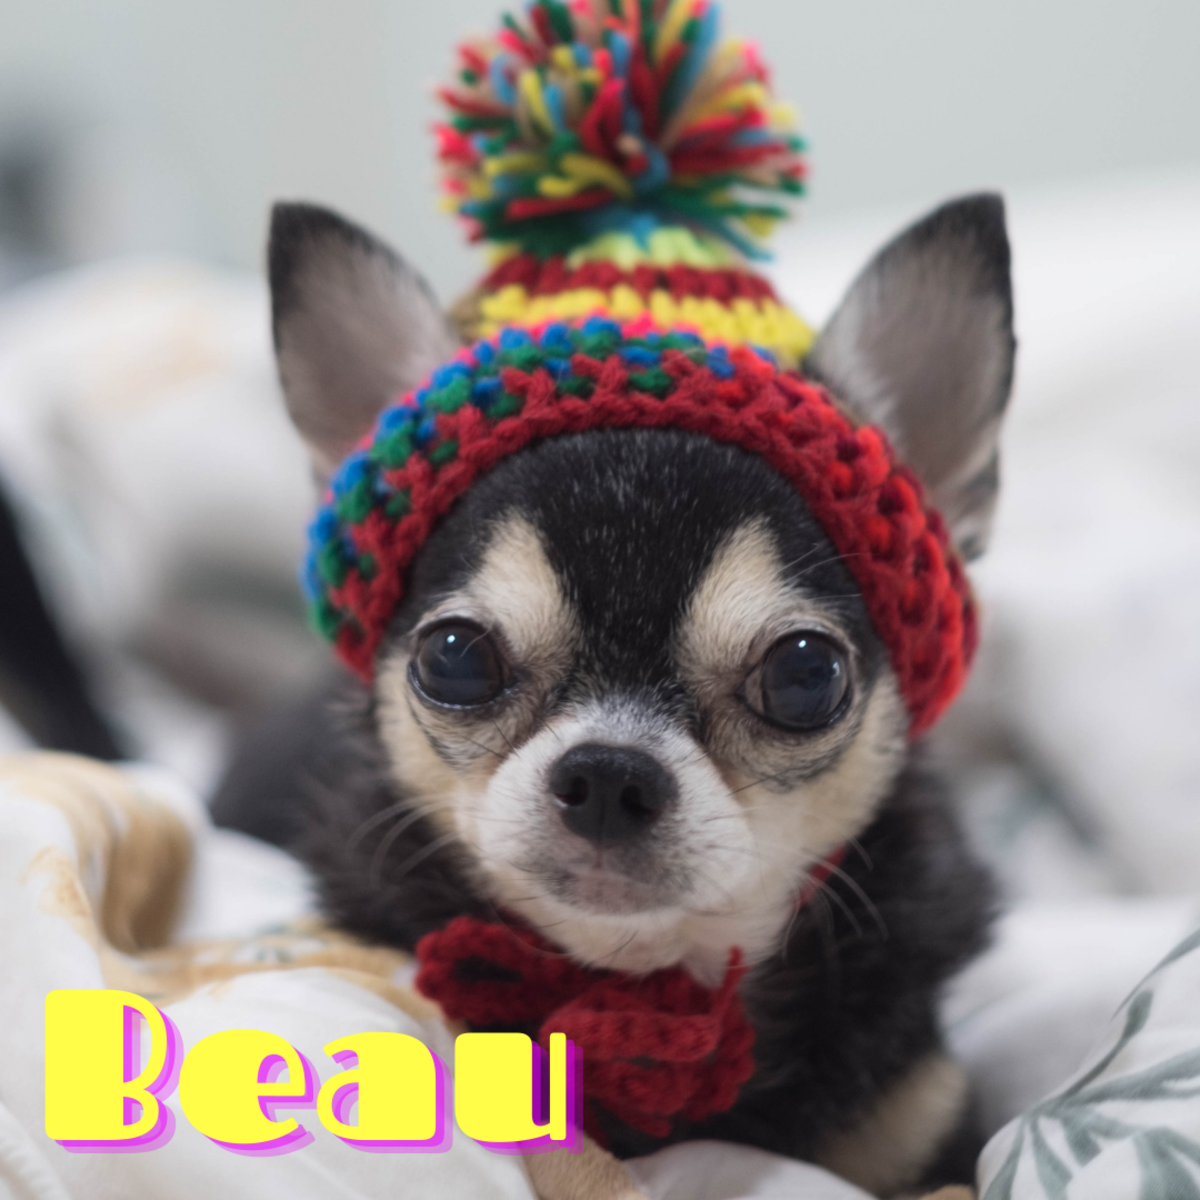 Go with a cute name like Beau for your little guy.